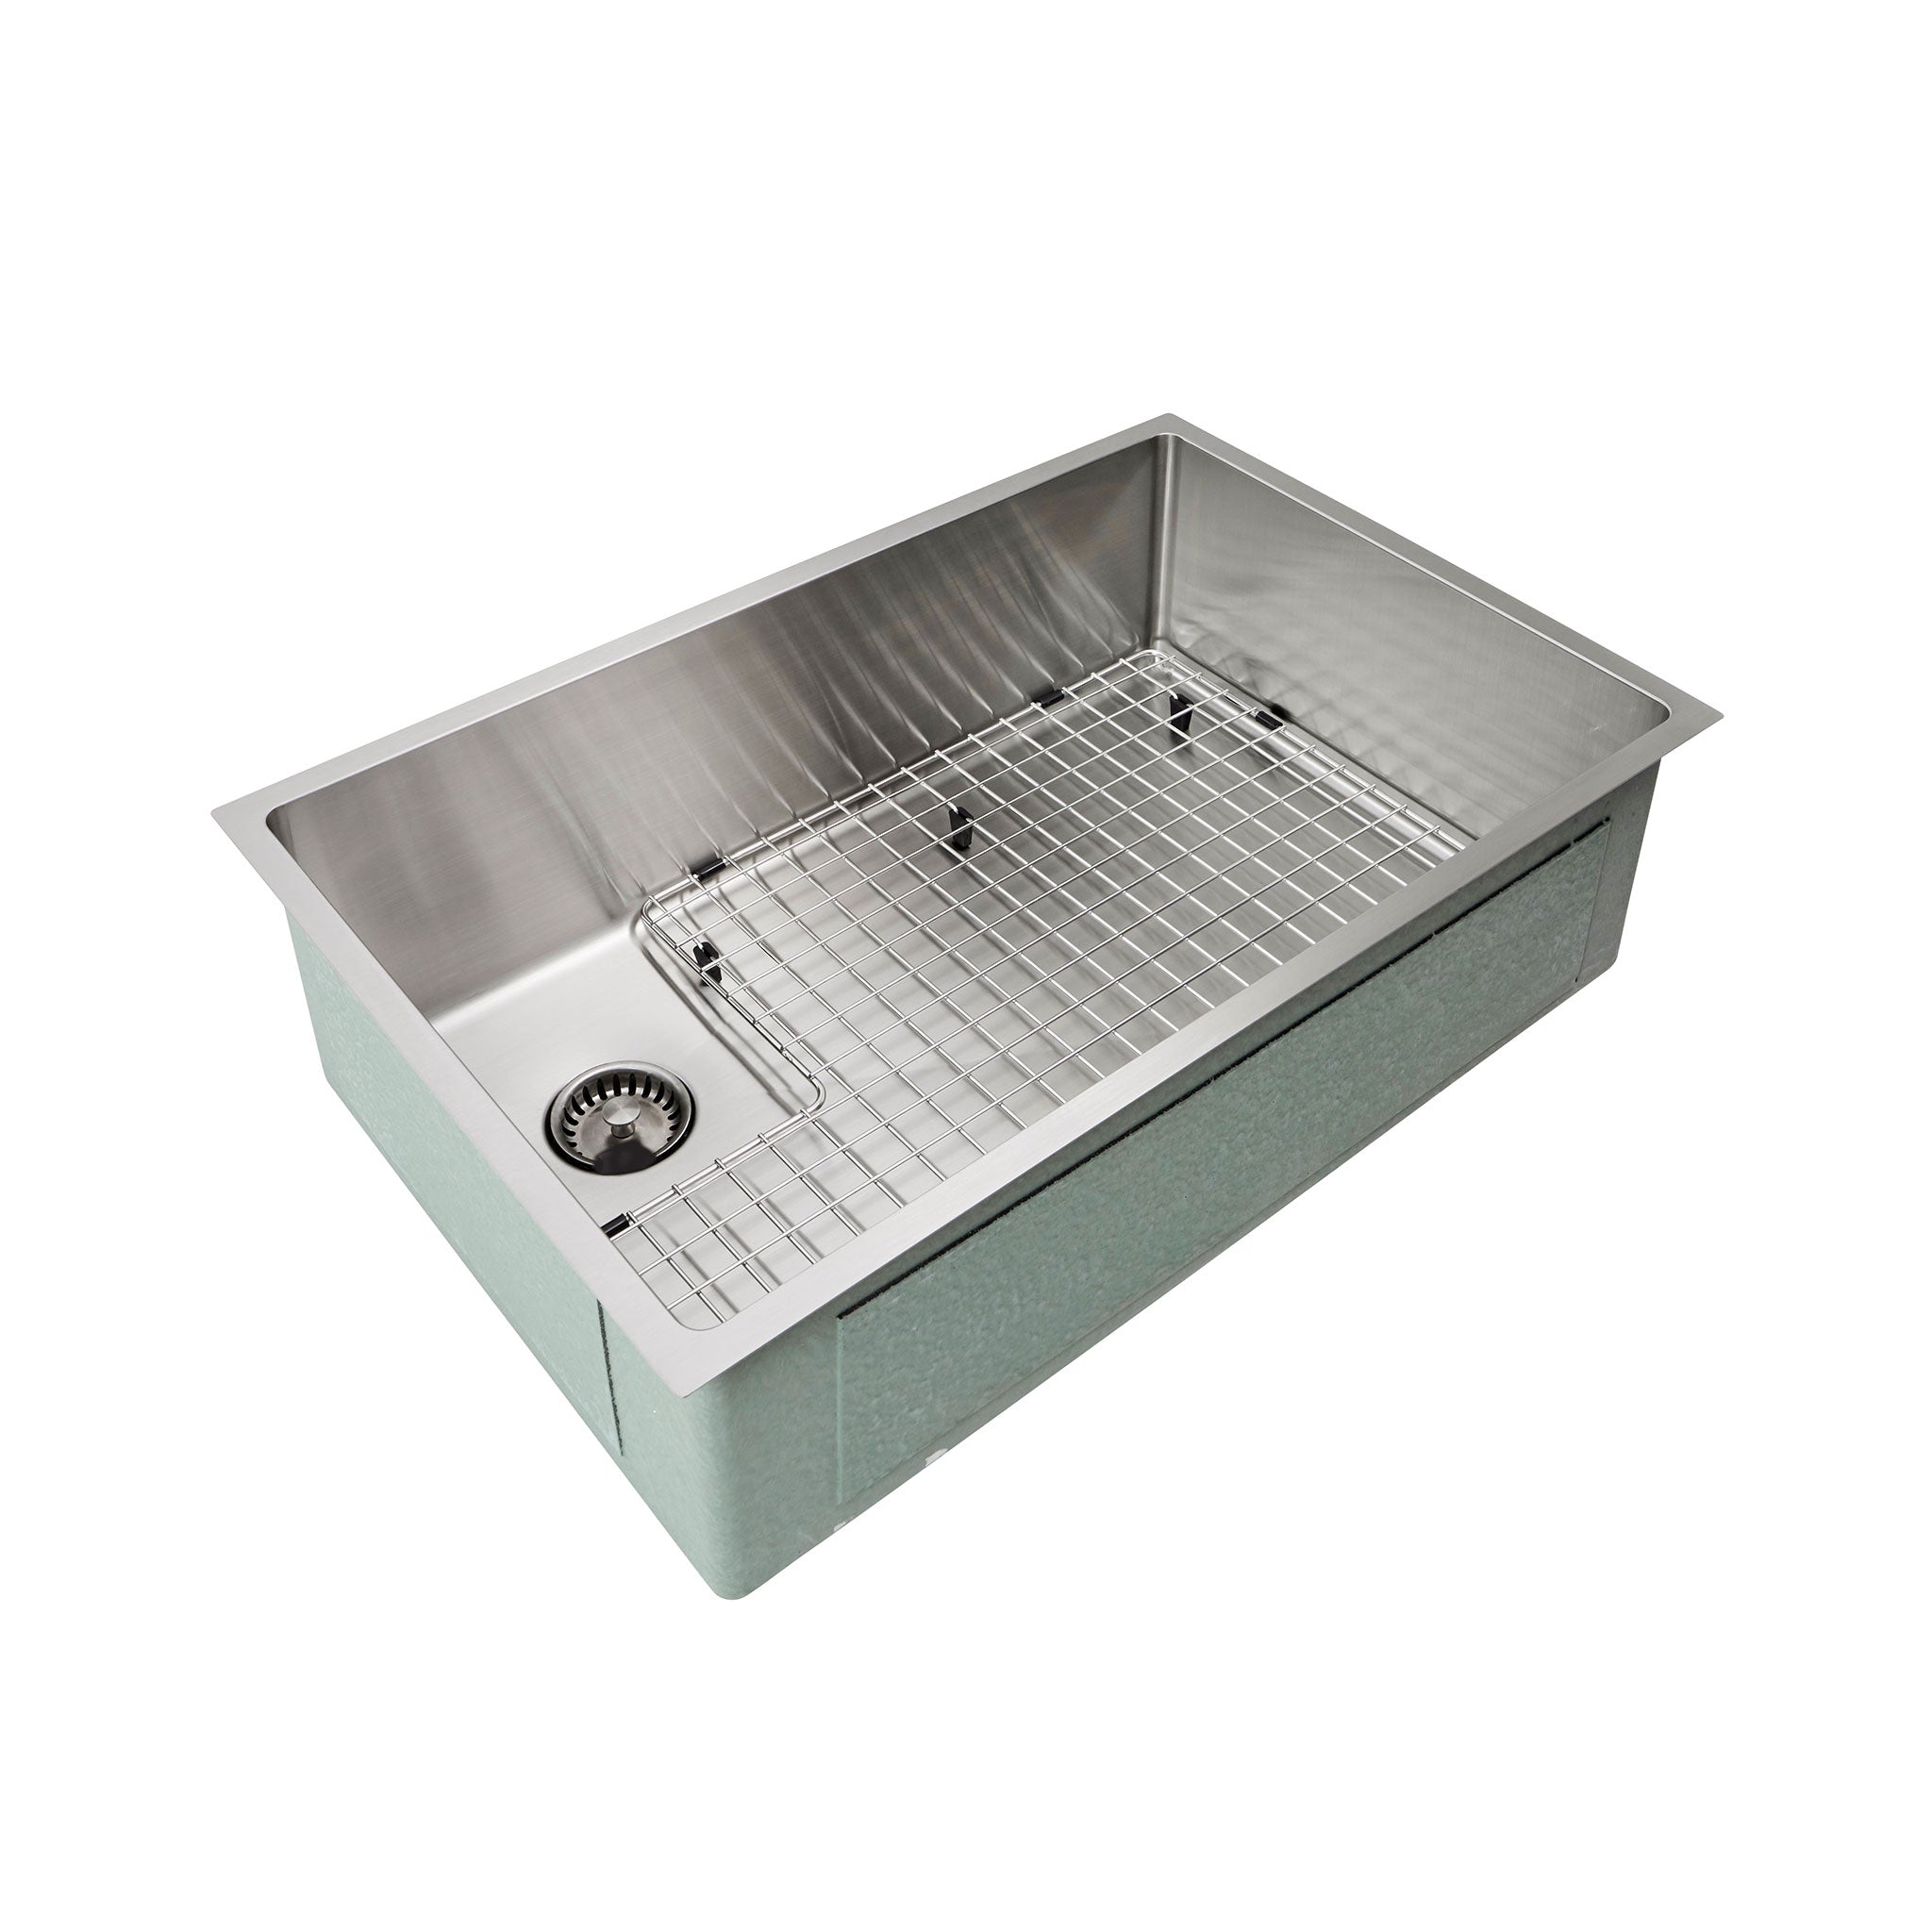 28" Stainless Steel Undermount Kitchen Sink with a matching basin grid and seamless drain.